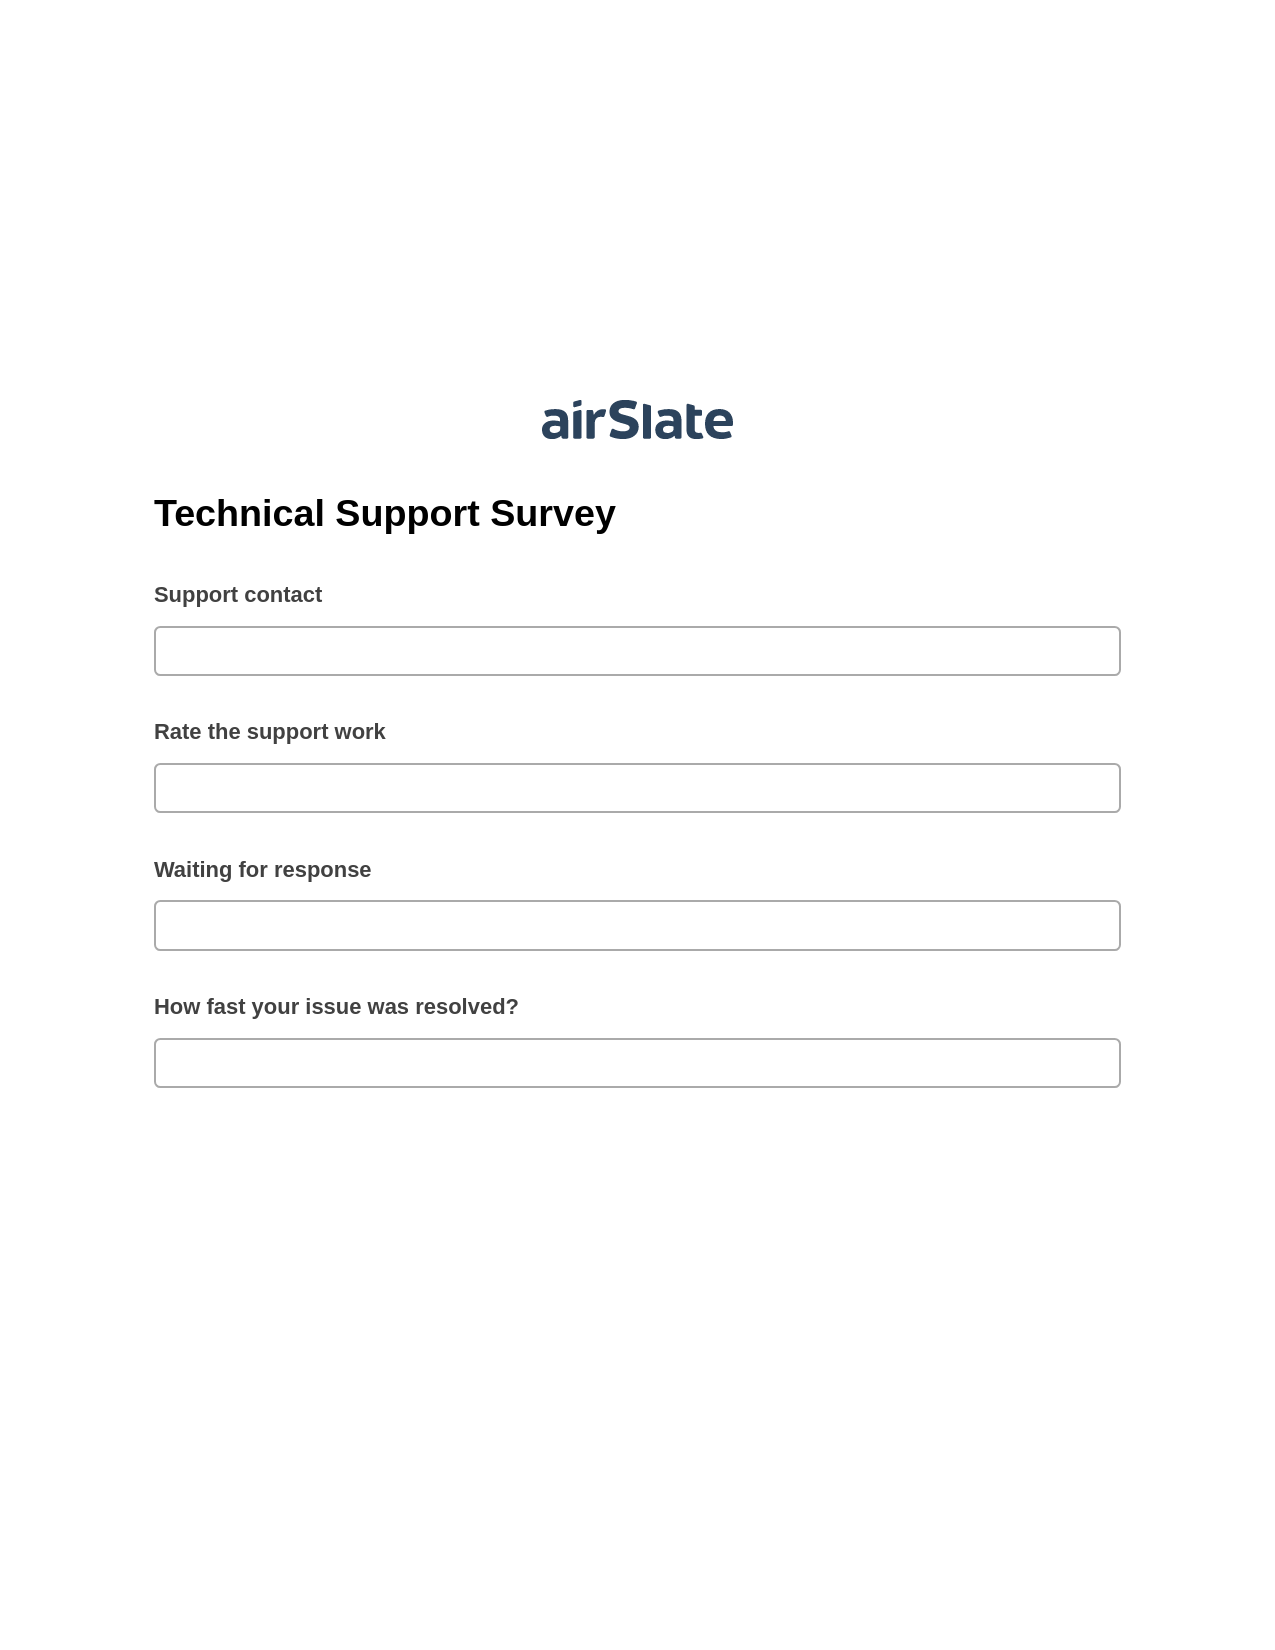 Technical Support Survey Pre-fill from Salesforce Records Bot, Update NetSuite Record Bot, Export to Google Sheet Bot